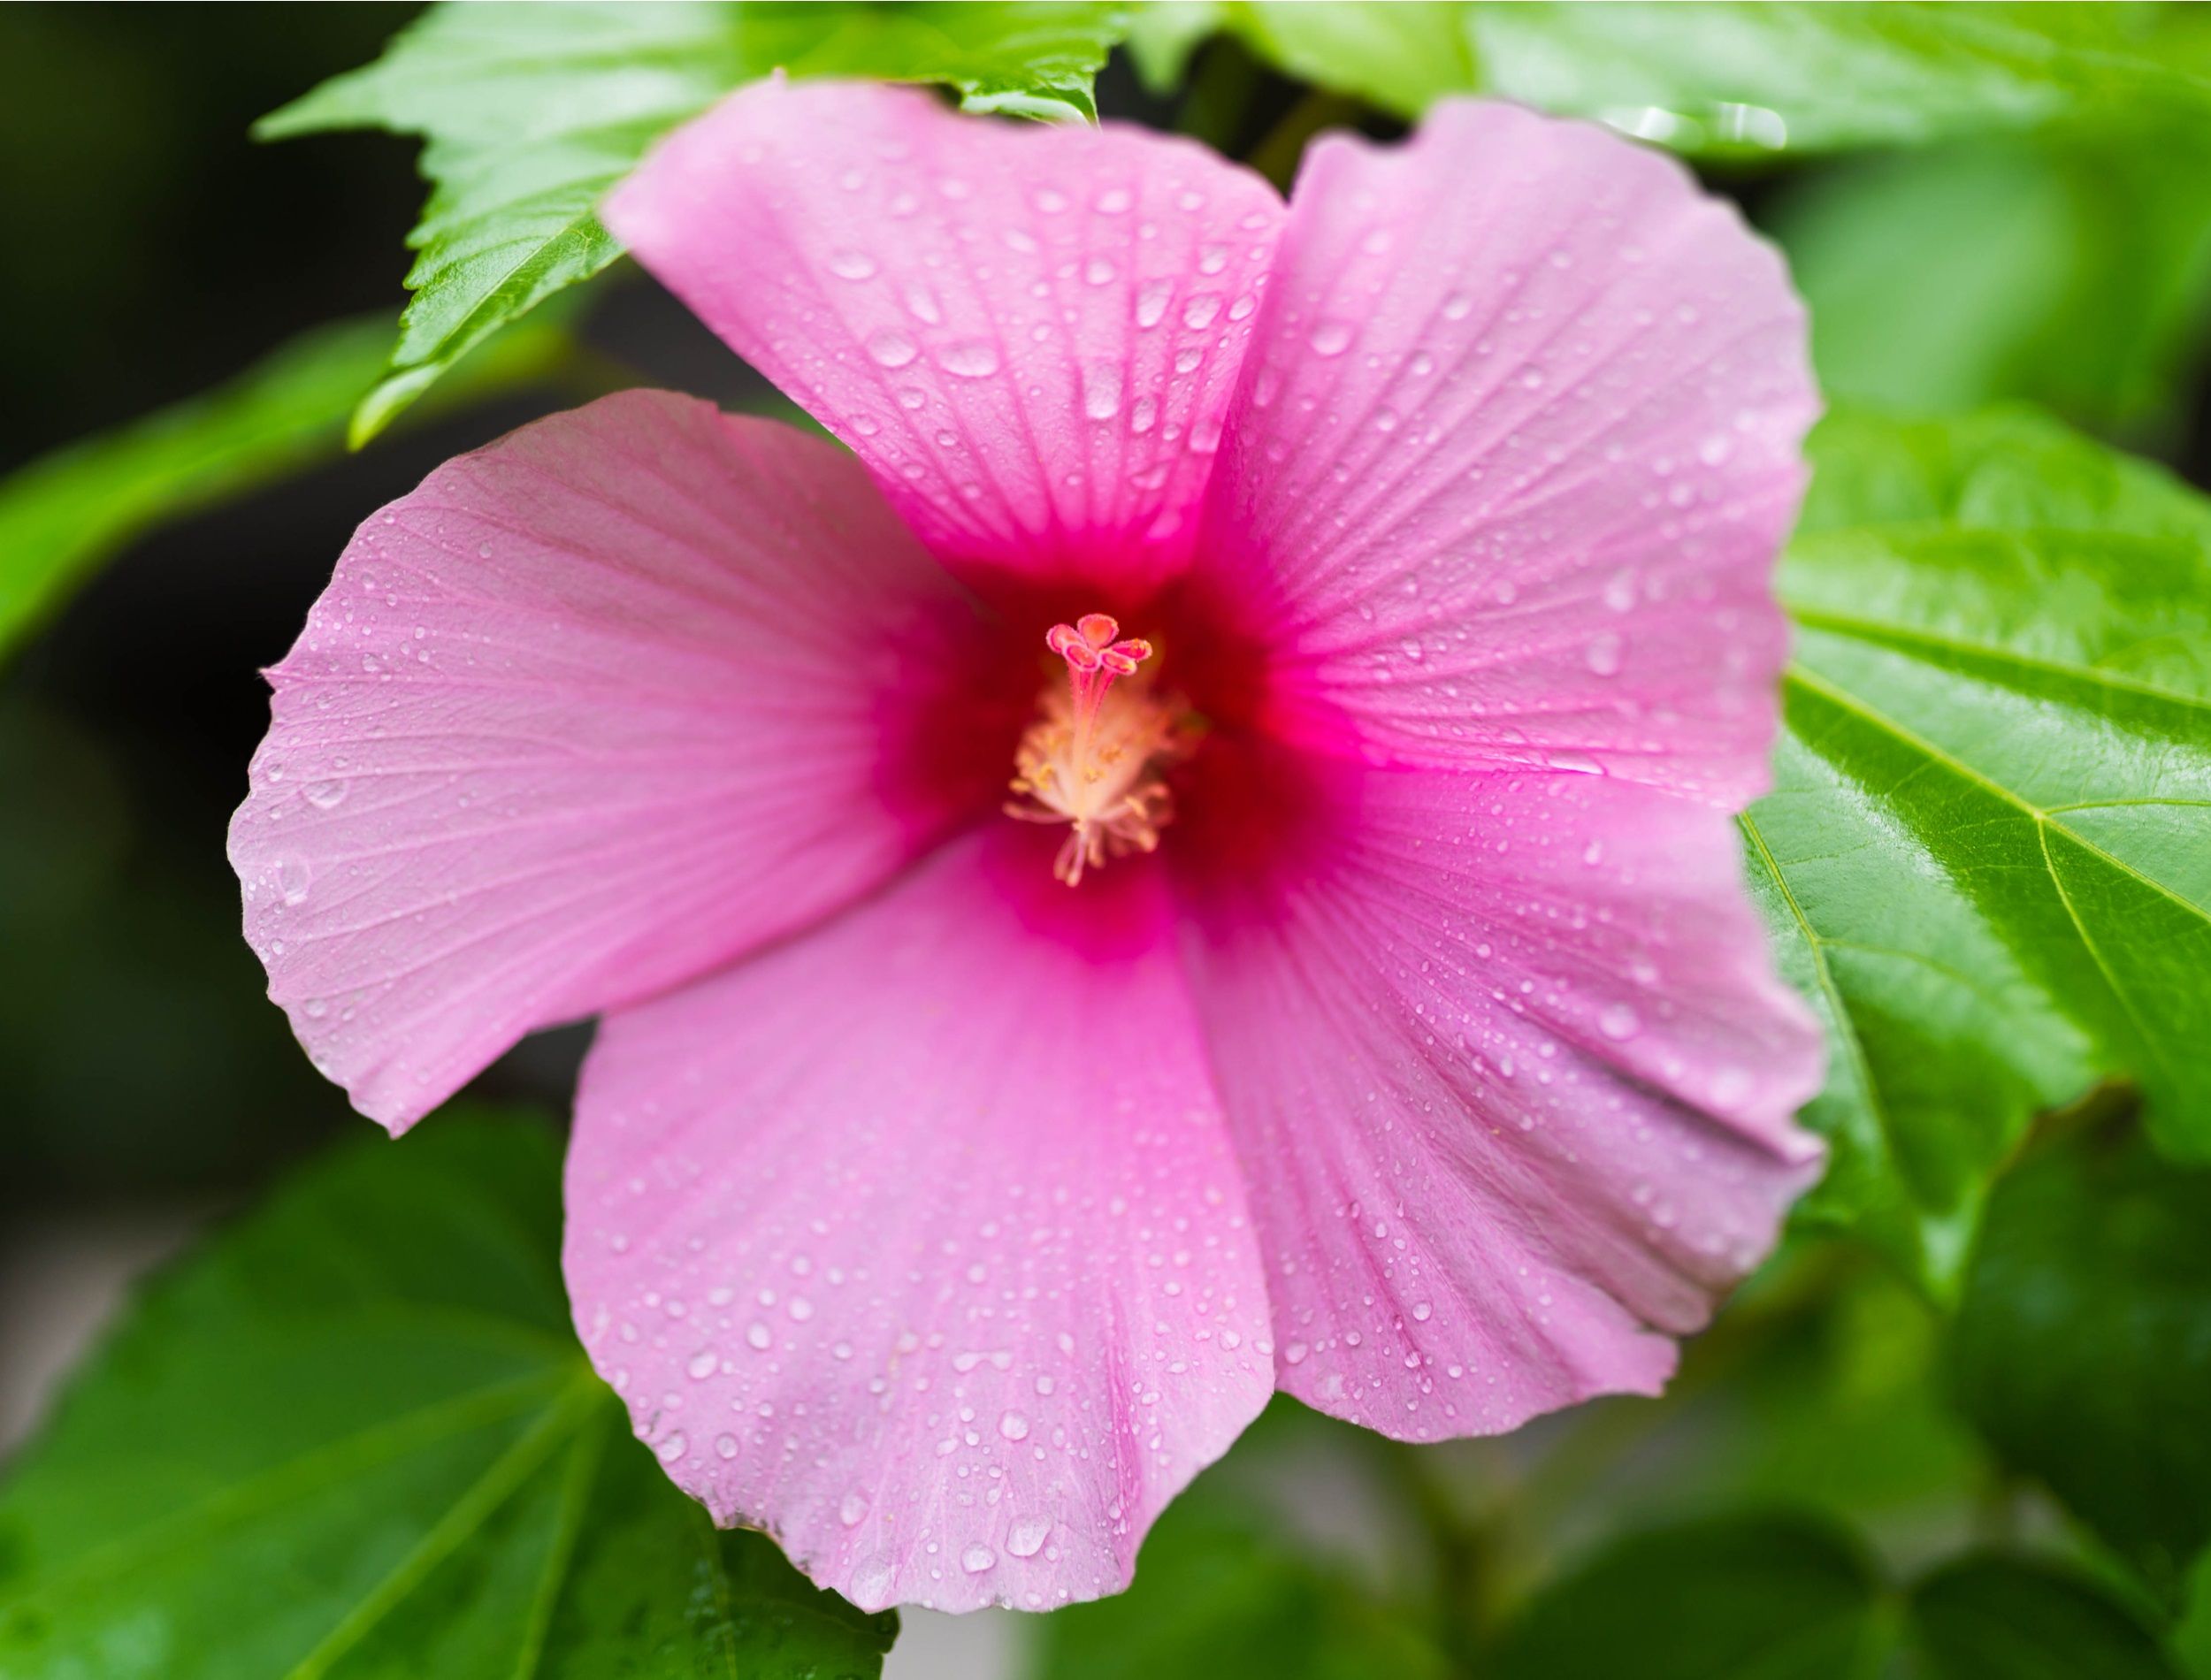 Hardy hibiscus flower with water droplets